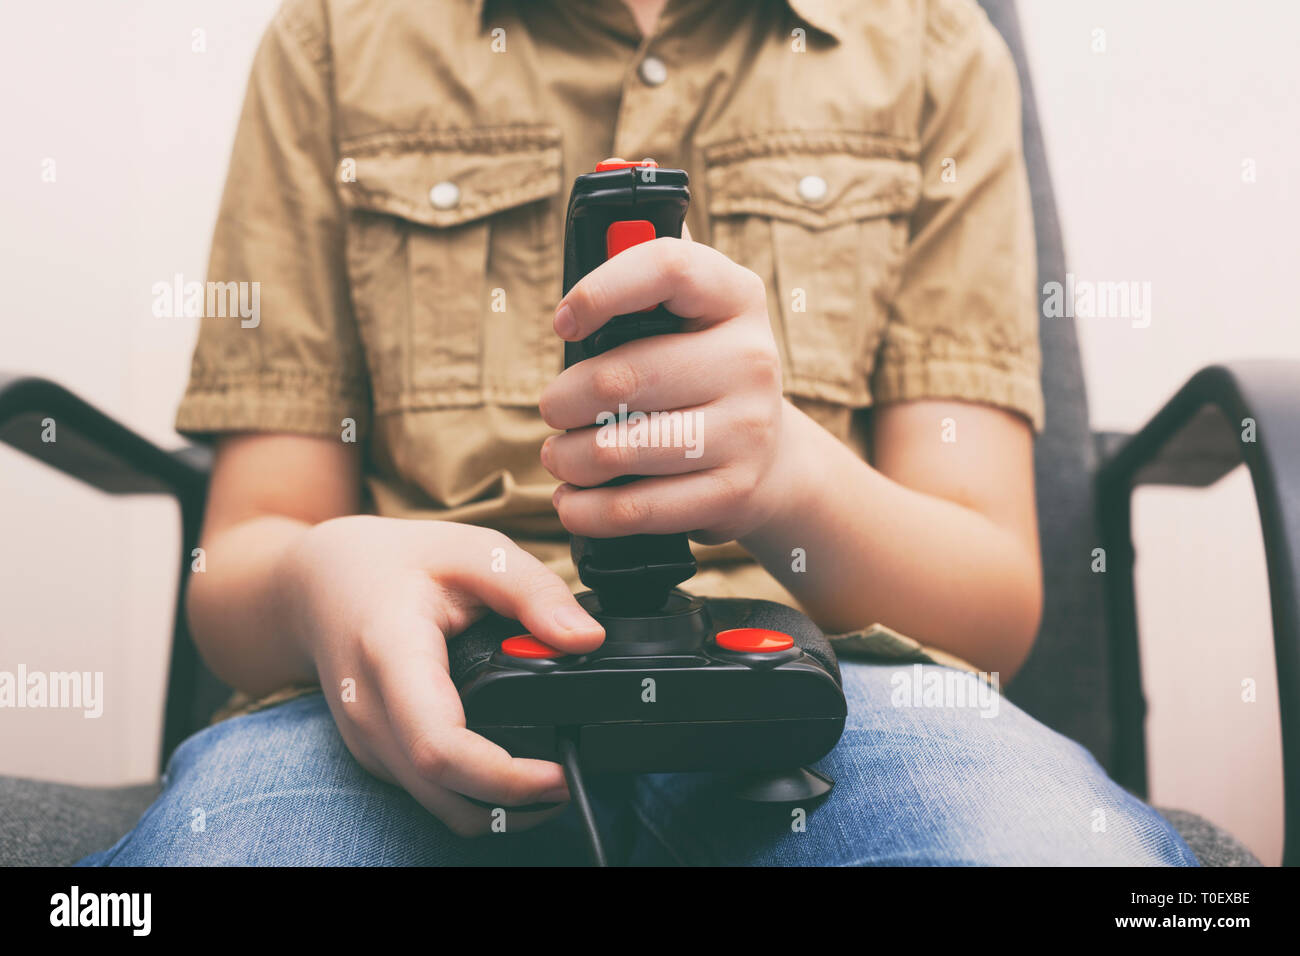 Young boy playing video game with a retro joystick. Gaming joystick from the mid-1980s. Close up. Stock Photo